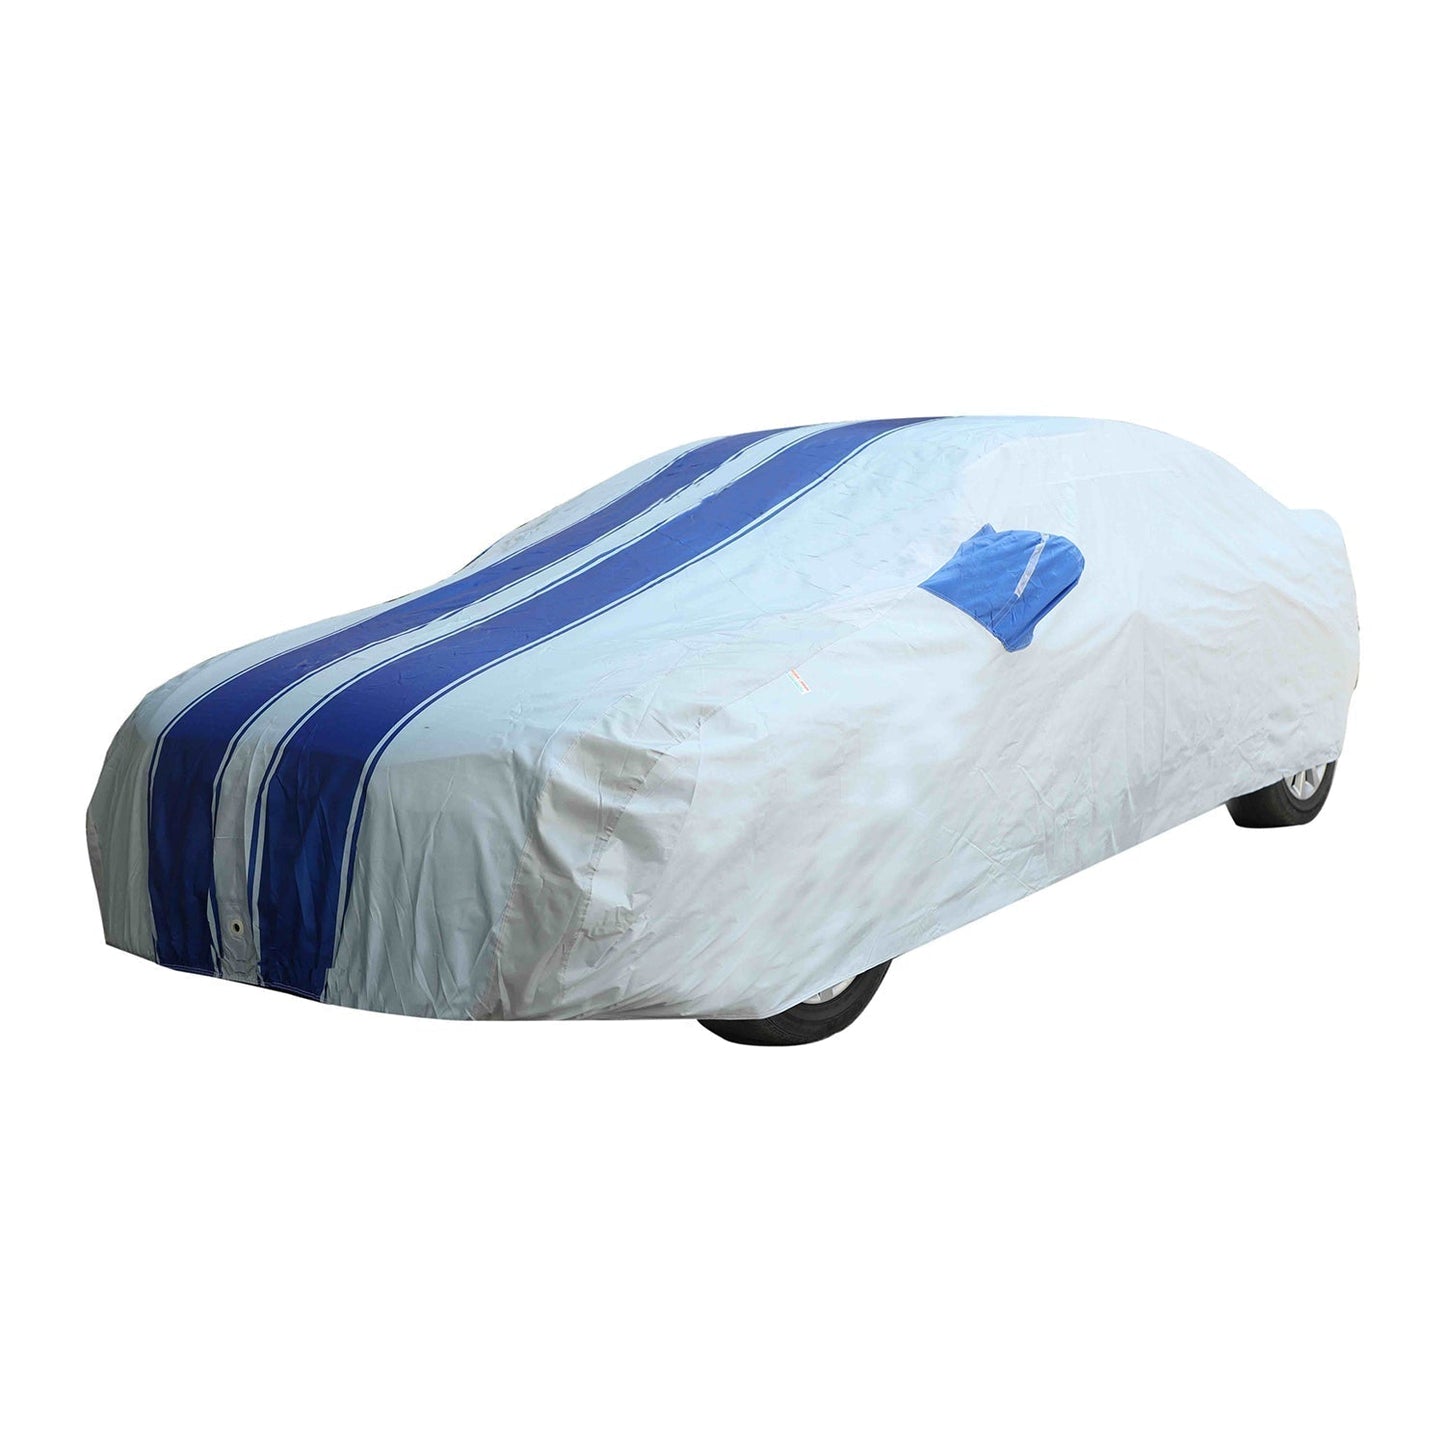 Oshotto 100% Blue dustproof and Water Resistant Car Body Cover with Mirror Pockets For Maruti Suzuki XL6